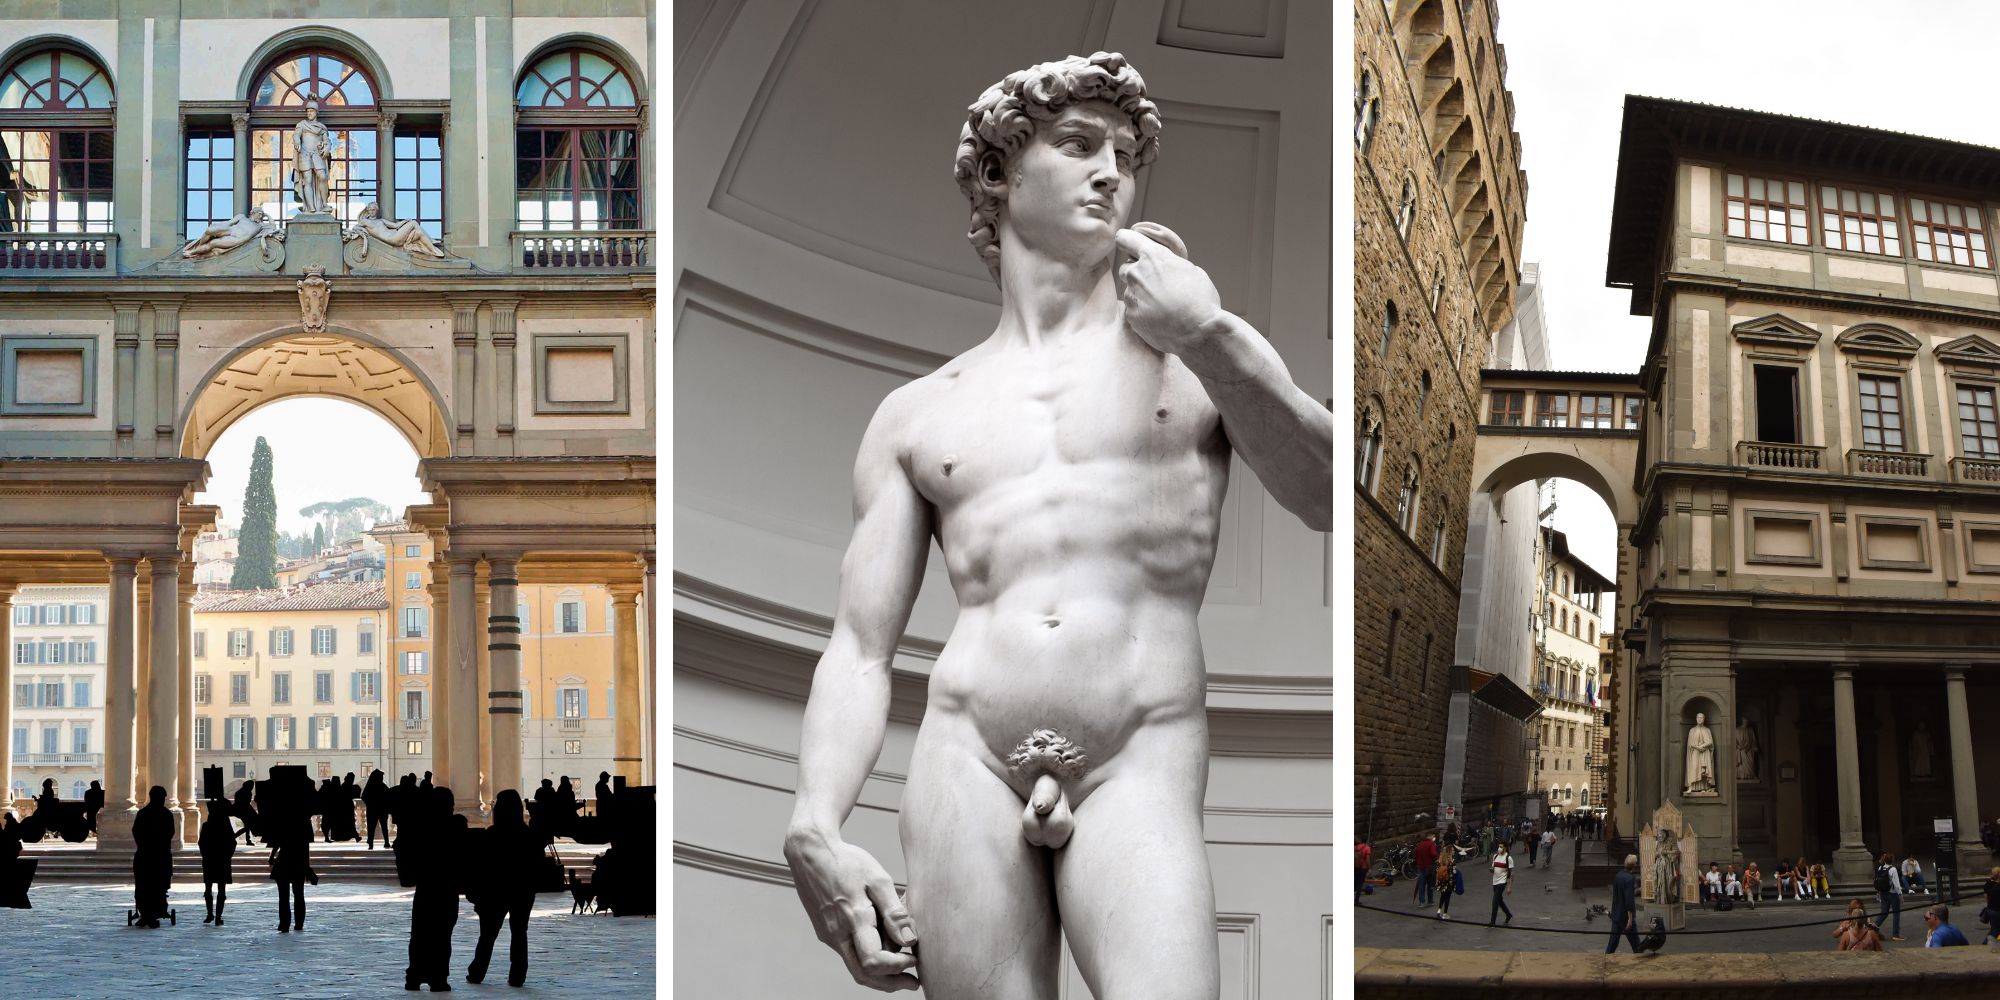 Examples of LGBTQ+ art when traveling in Florence, Italy.